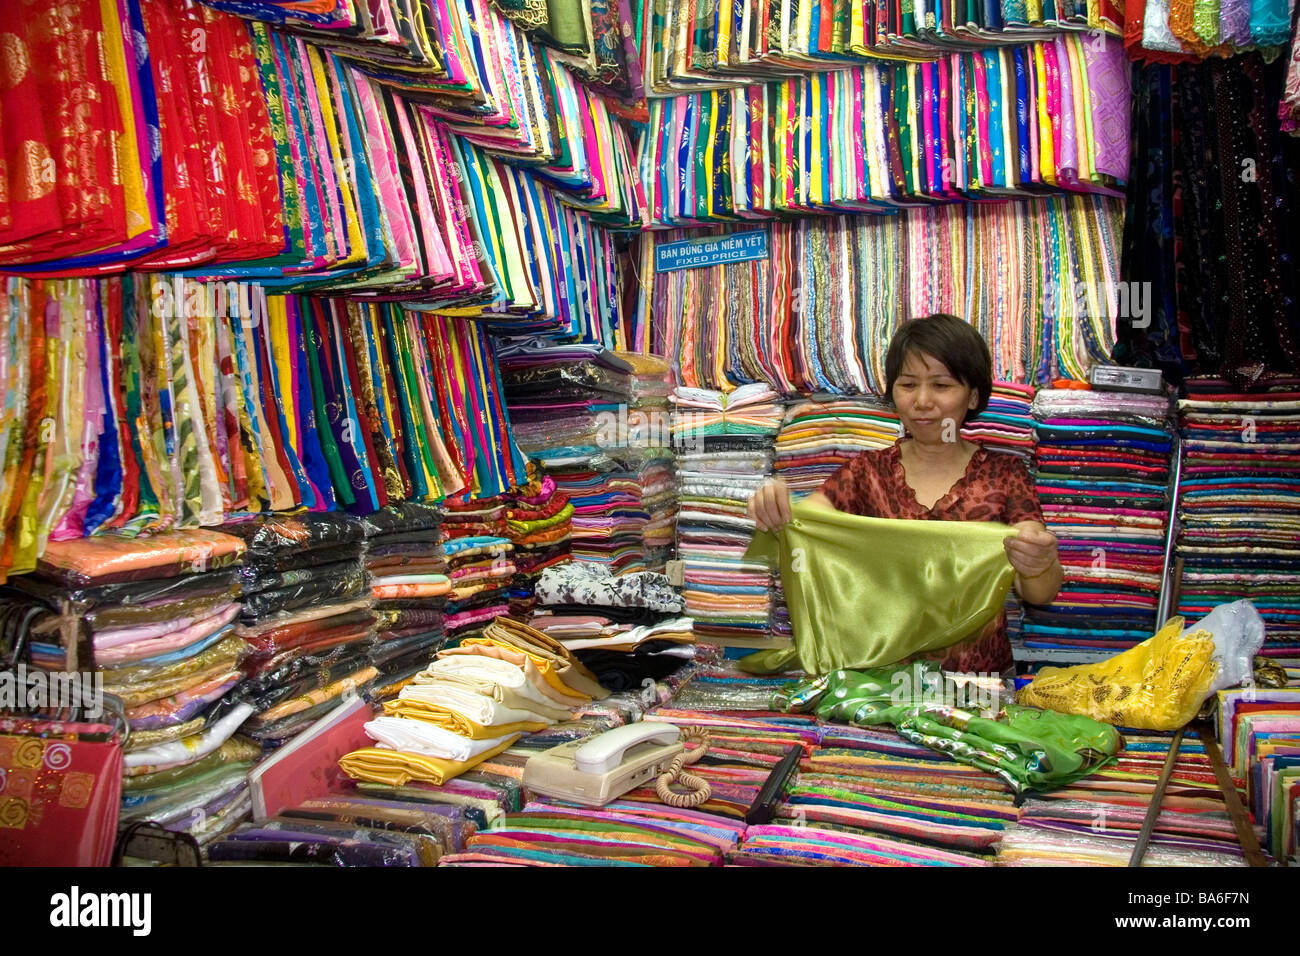 Vendors selling silk fabric in the Ben Thanh Market located in Ho Chi Minh City Vietnam Stock Photo